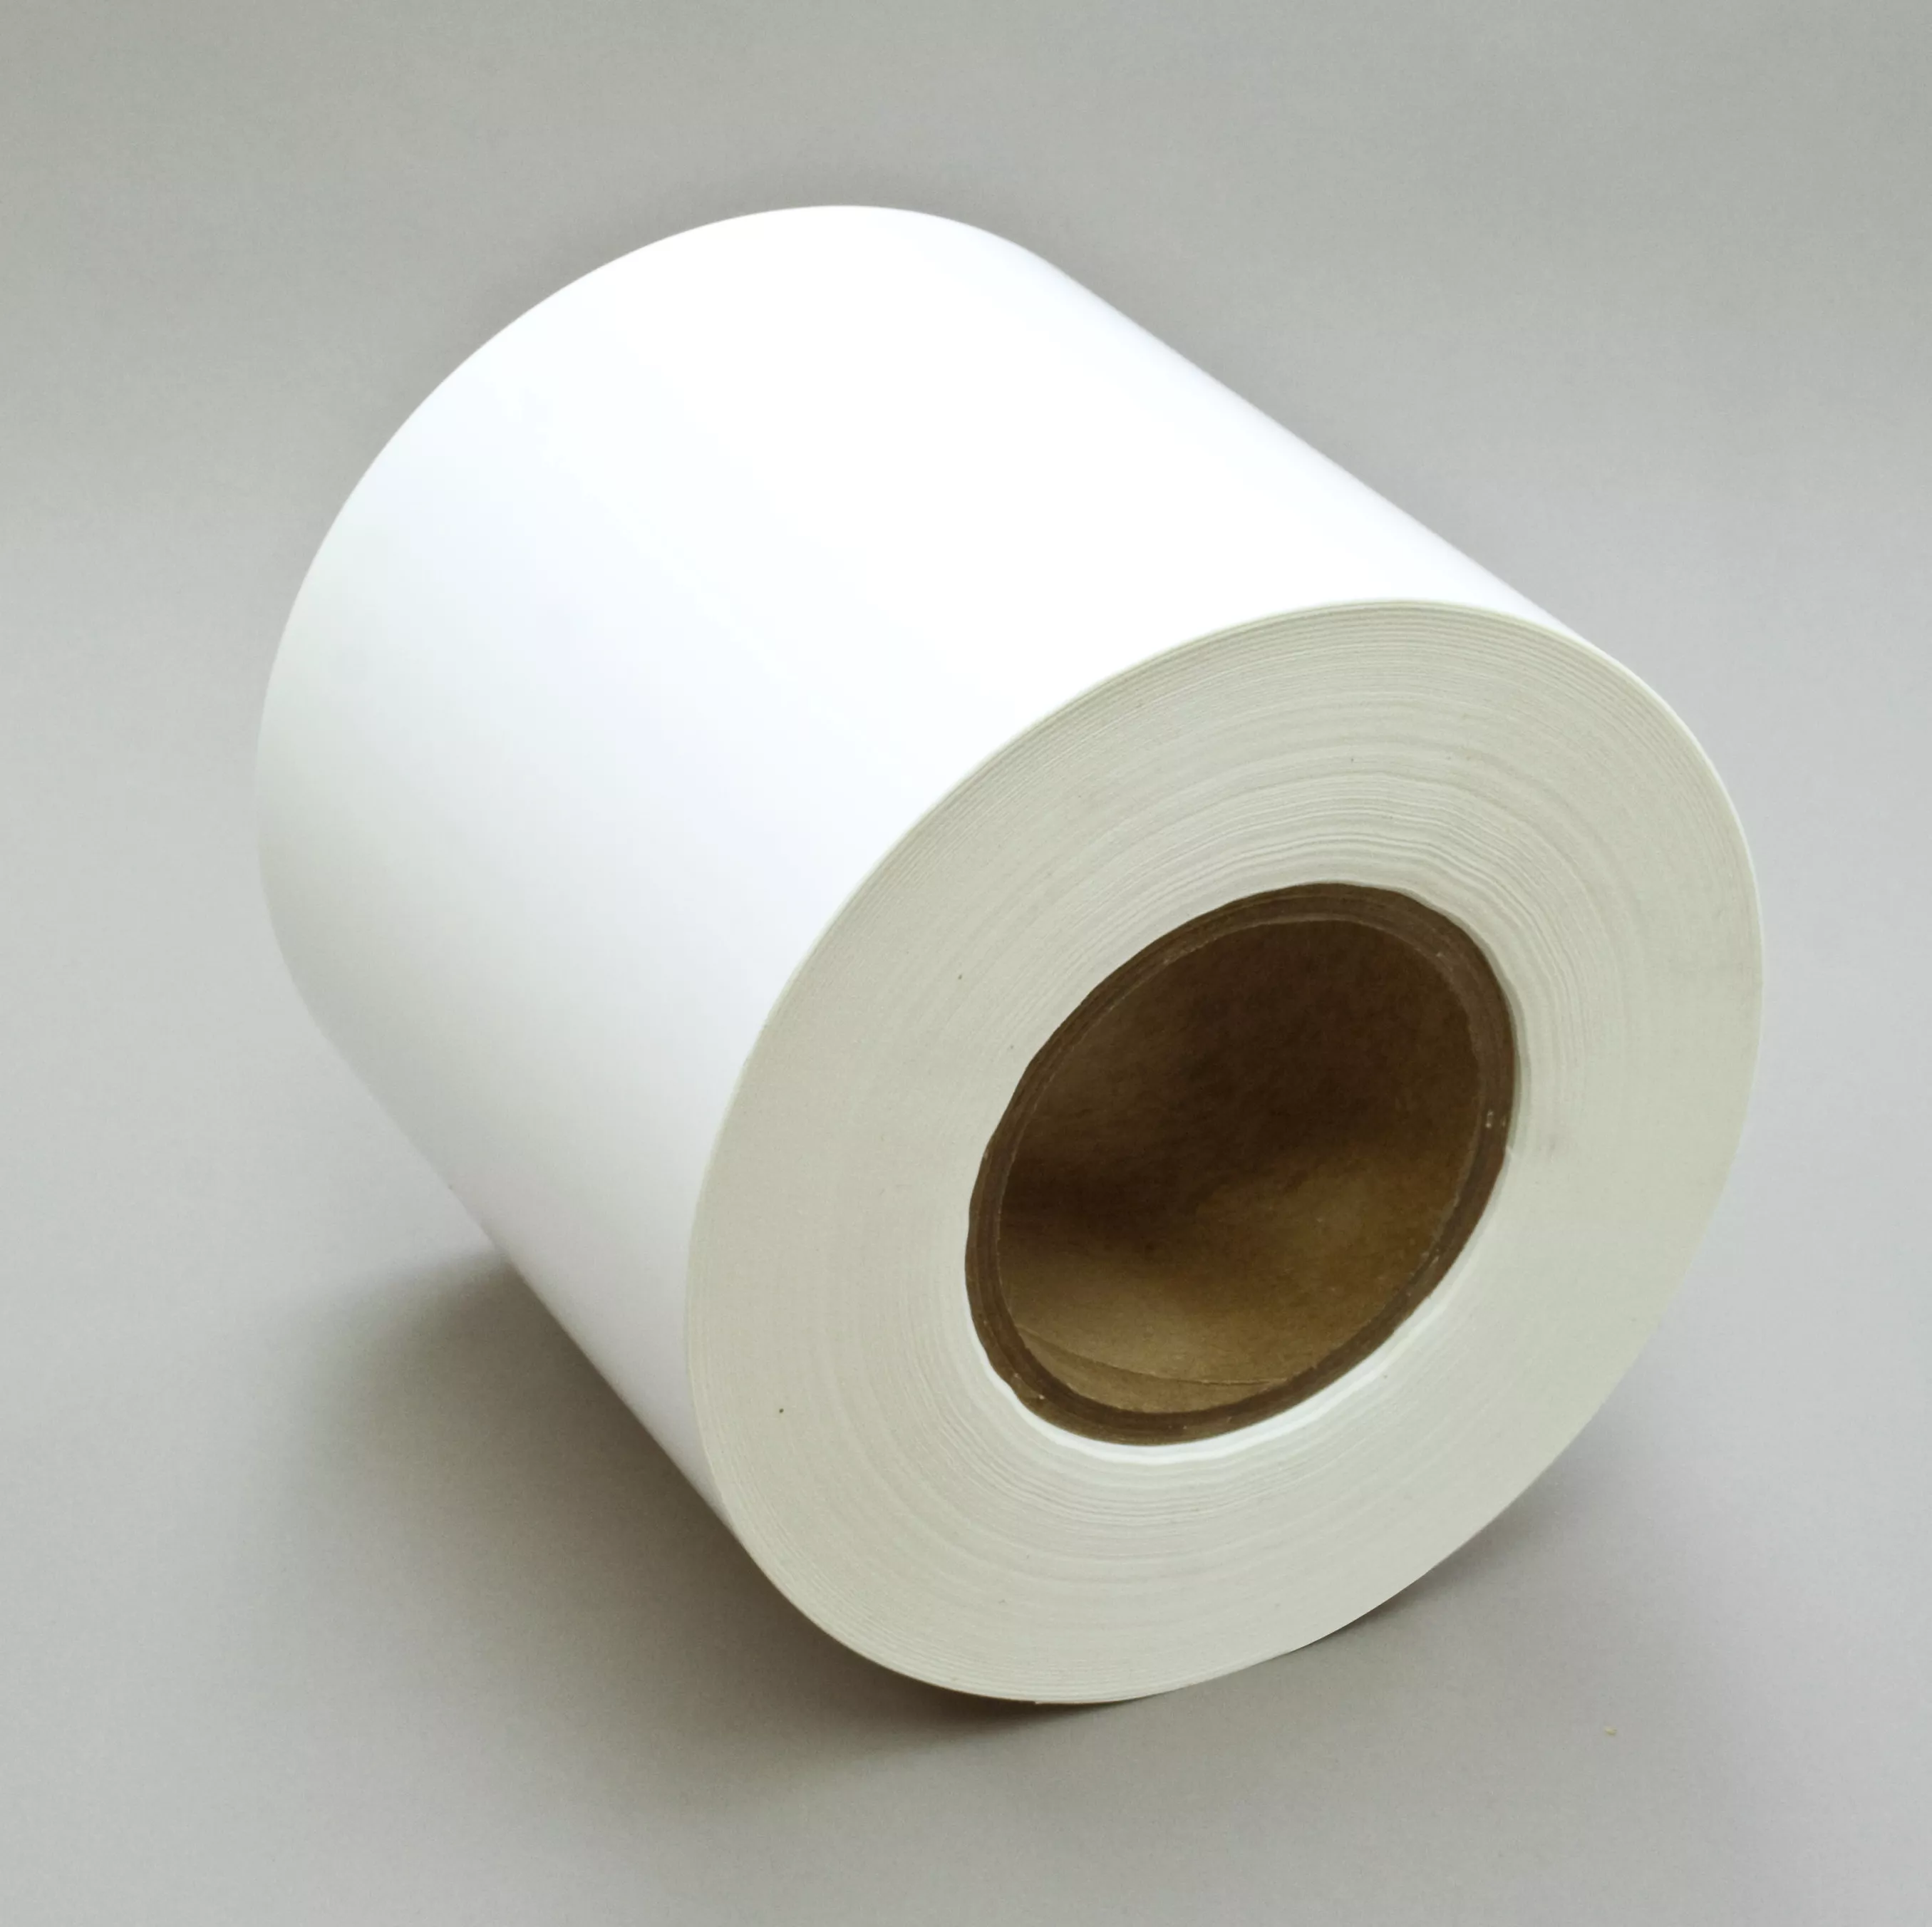 3M™ Thermal Transfer Label Material 7815, White Polyester Matte, 6 in x
1668 ft, 1 Roll/Case